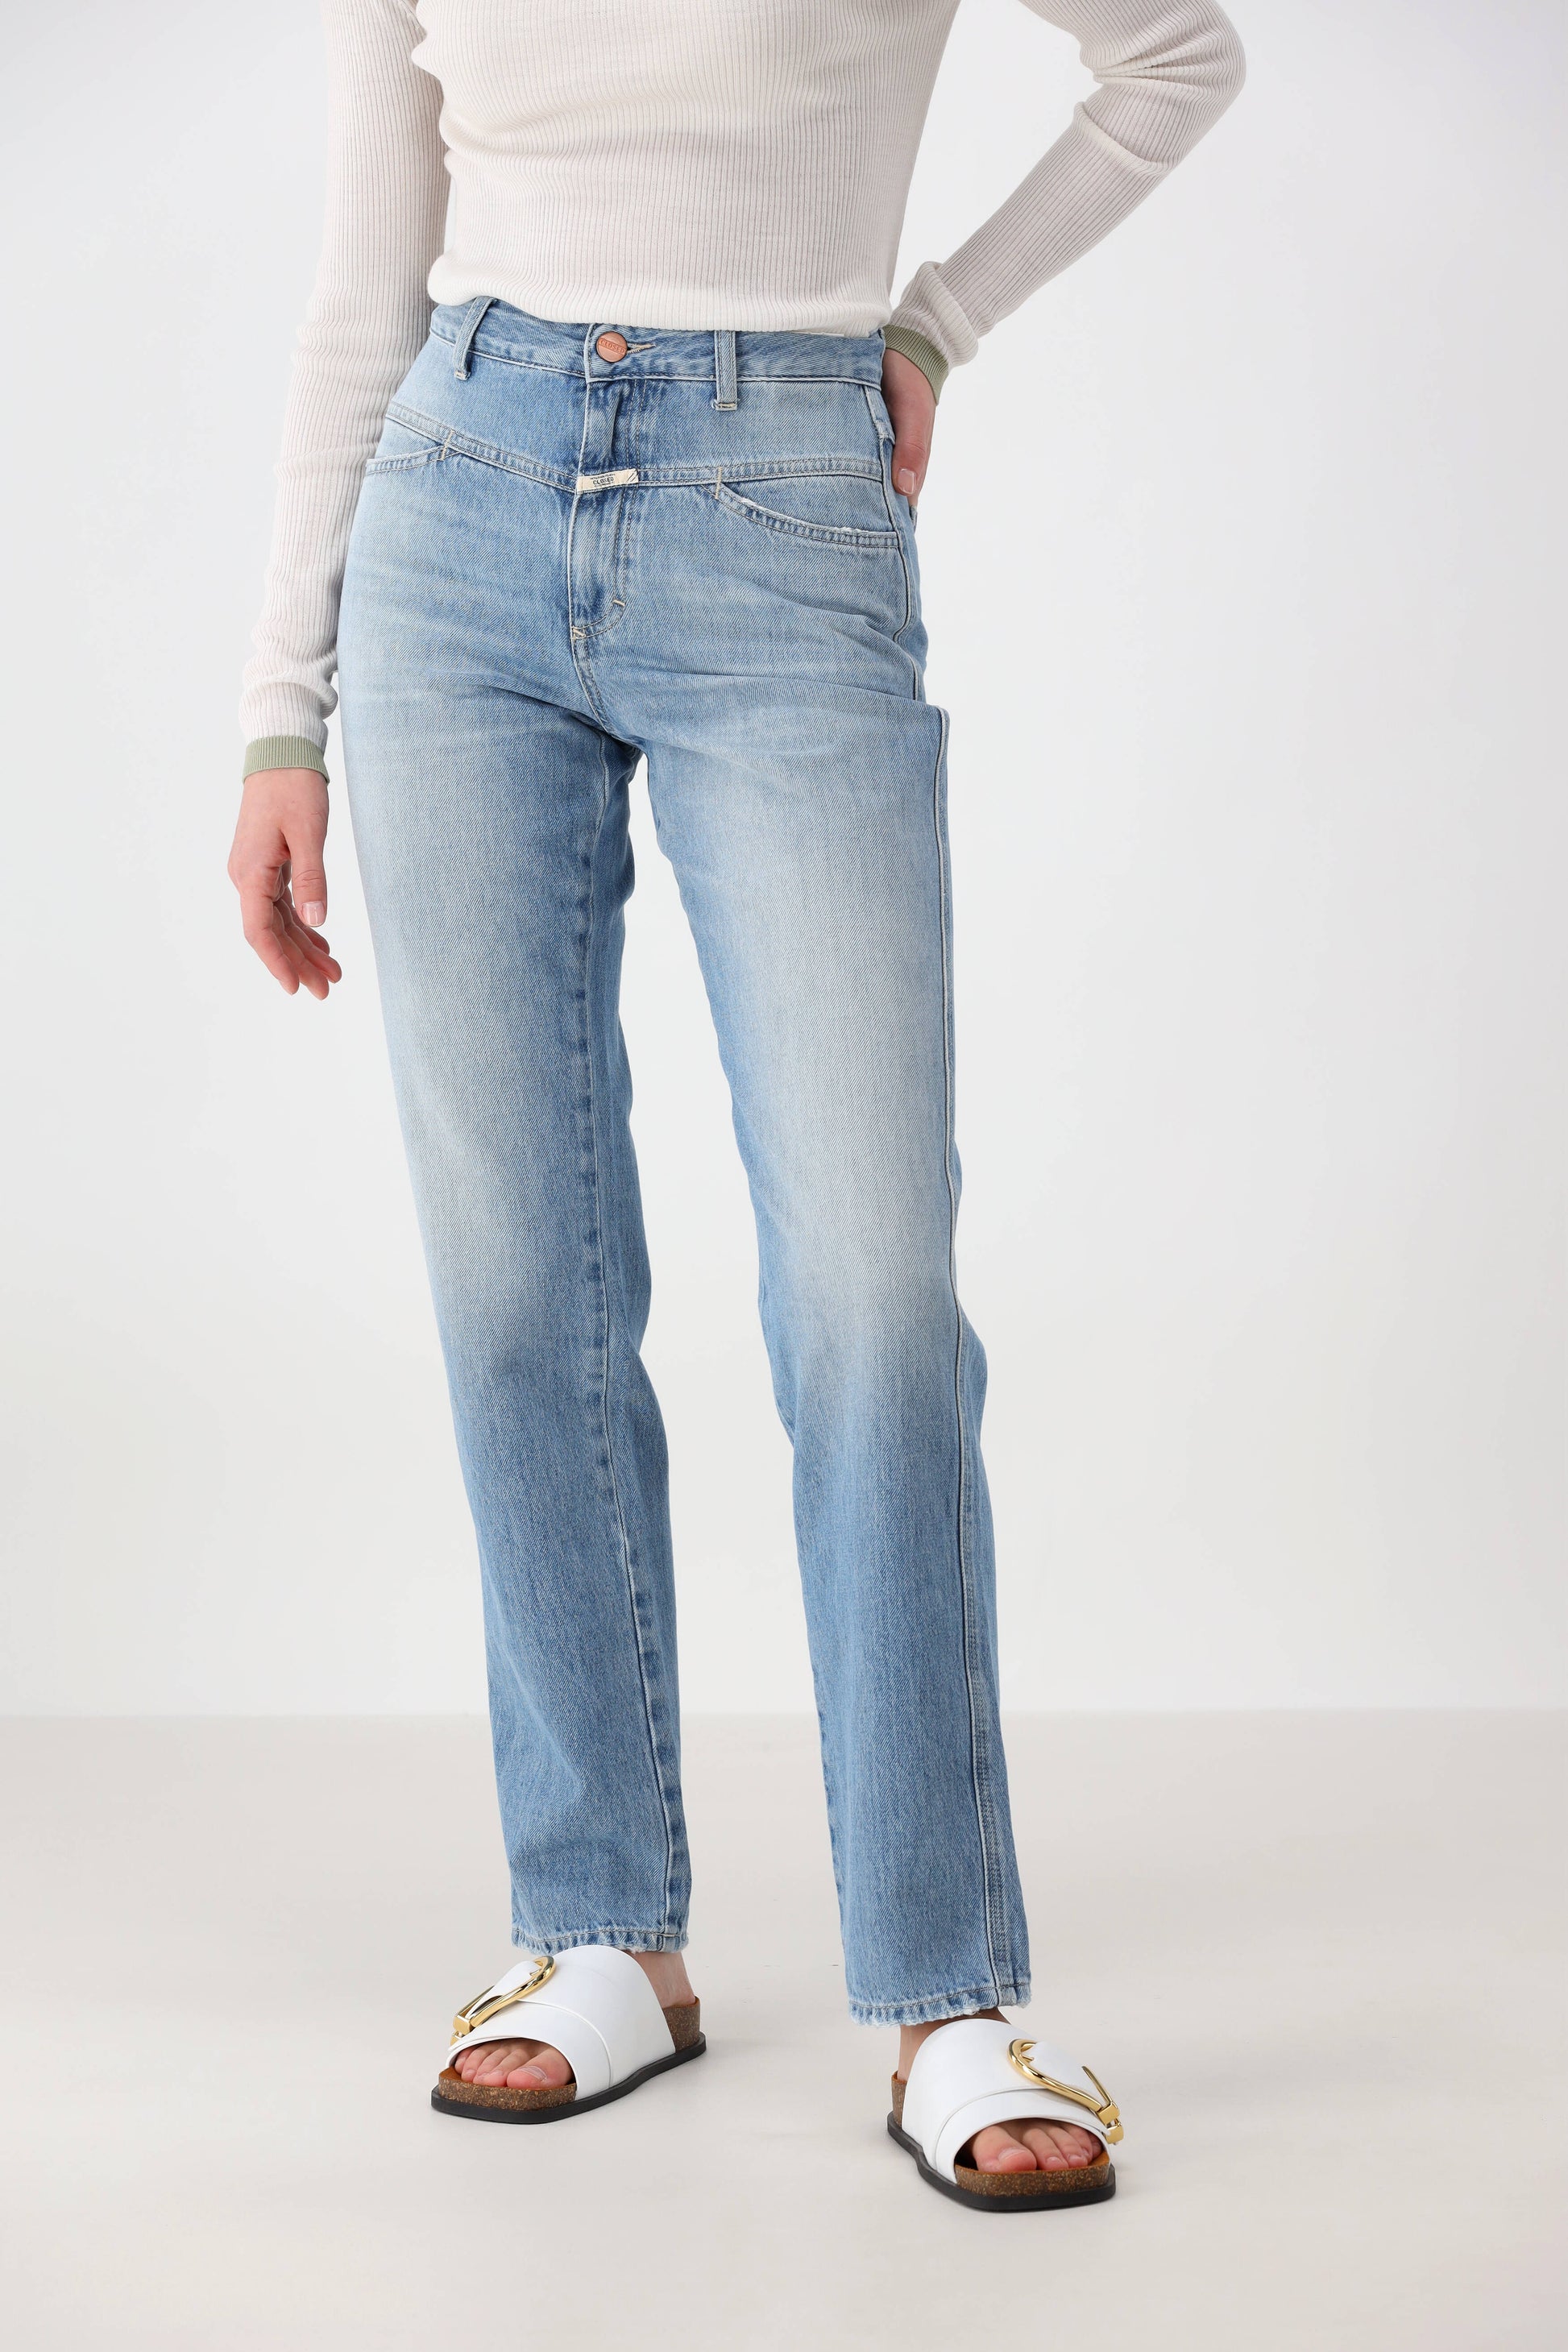 Jeans X-Pose in Light BlueClosed - Anita Hass